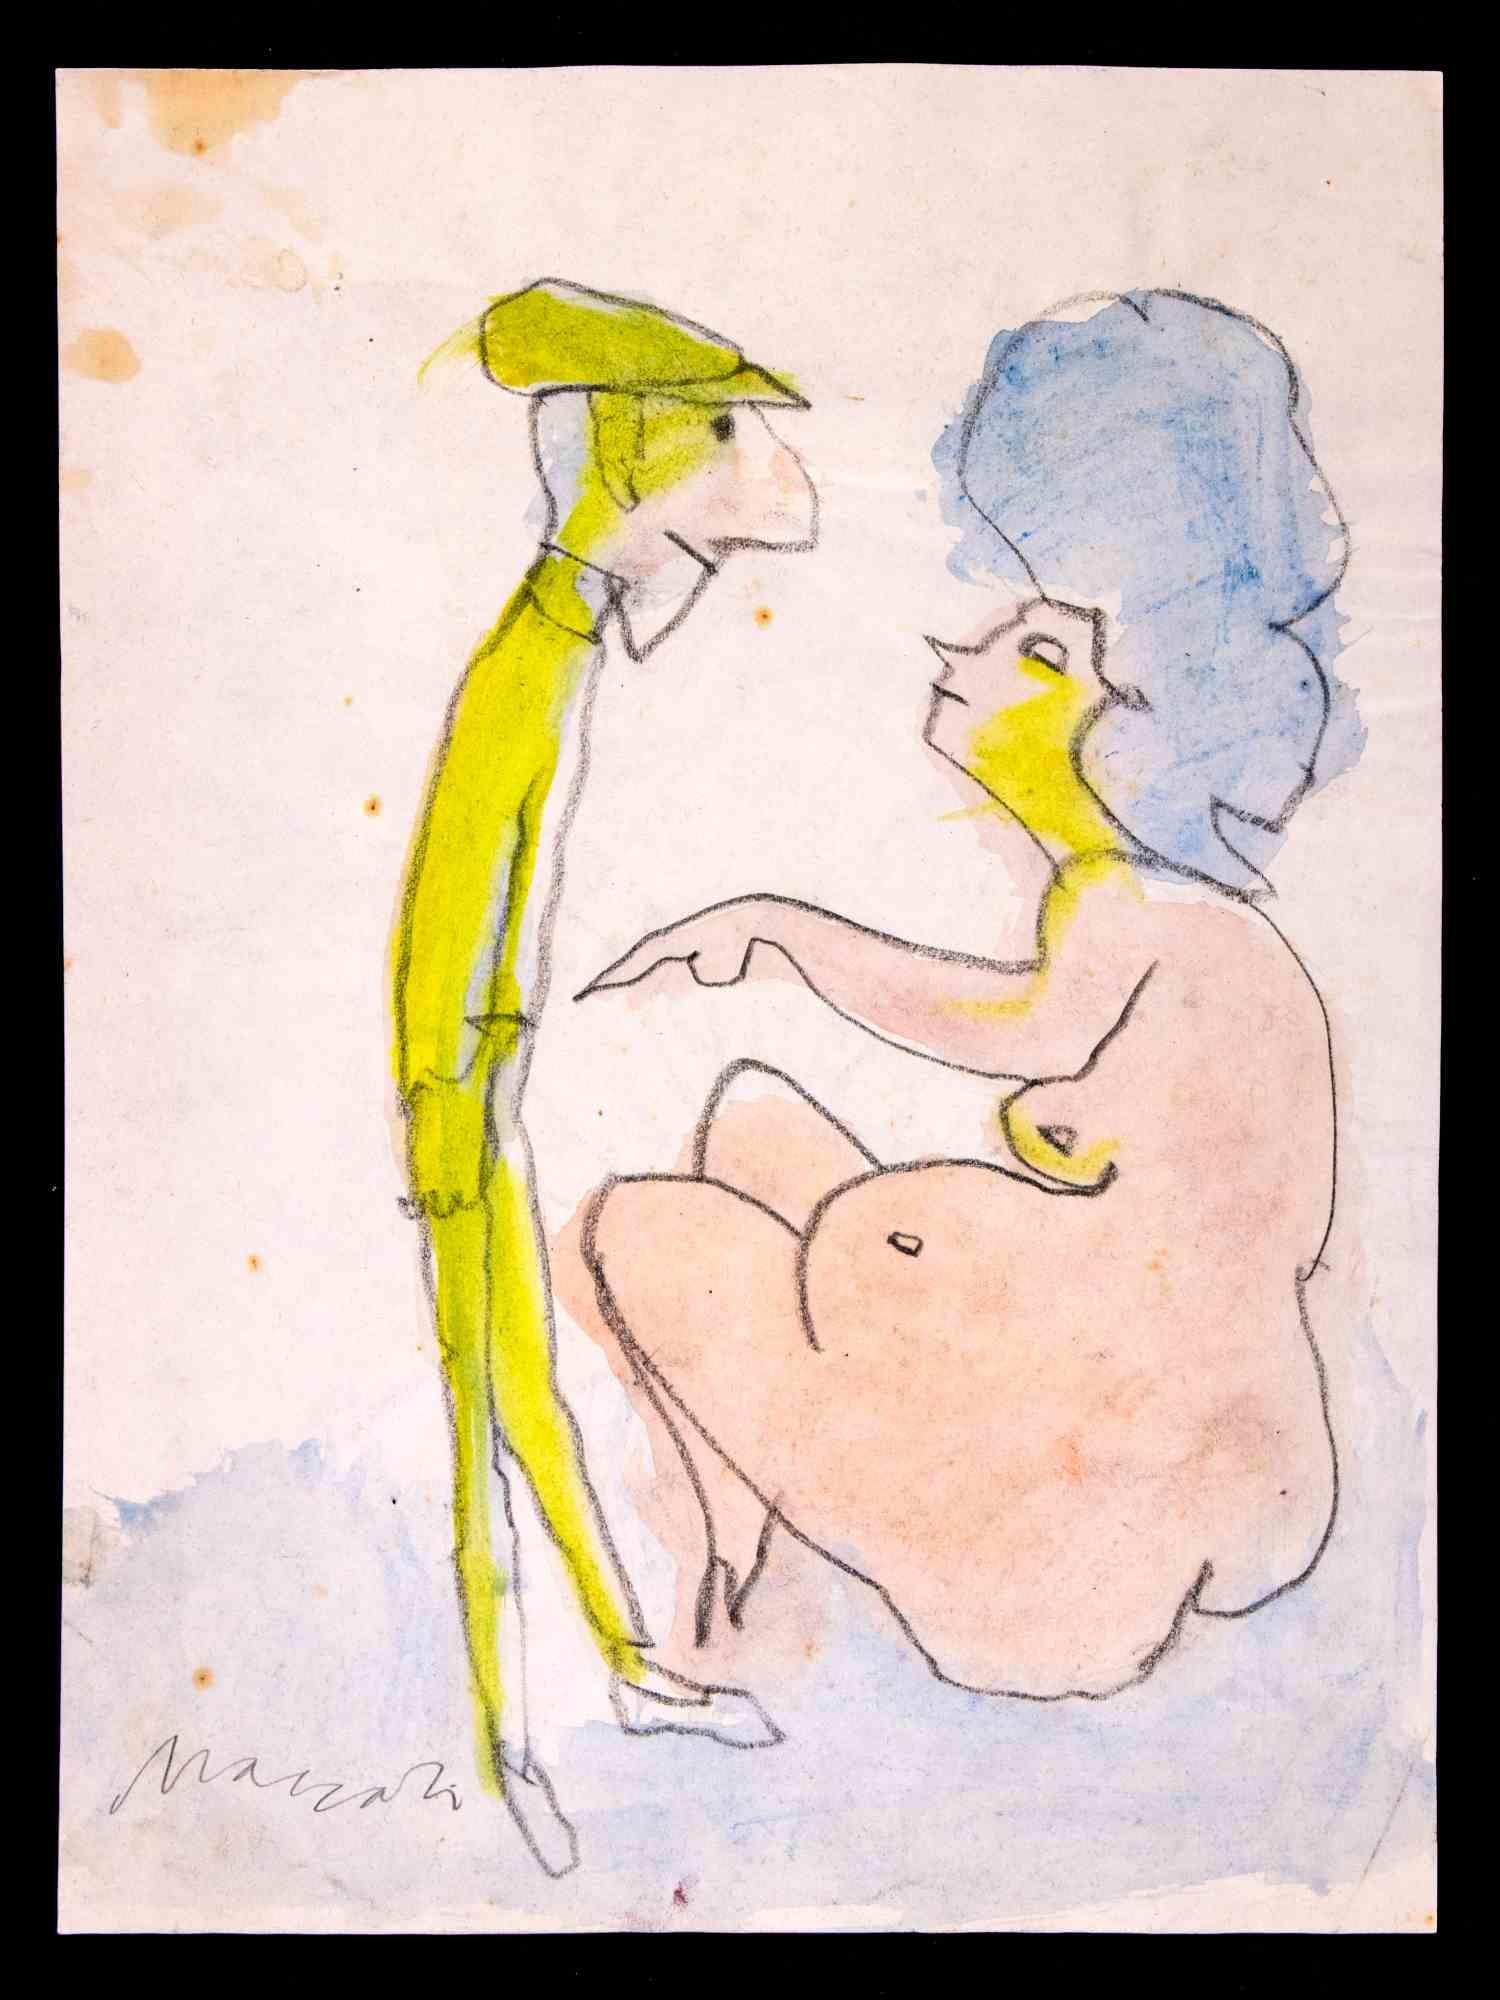 The Couple is a Pencil, pastel and Watercolour drawing realized by Mino Maccari (1924-1989) in 1980s.

Hand-signed on the lower margin.

Good condition on a white paper.

Mino Maccari (Siena, 1924-Rome, June 16, 1989) was an Italian writer, painter,